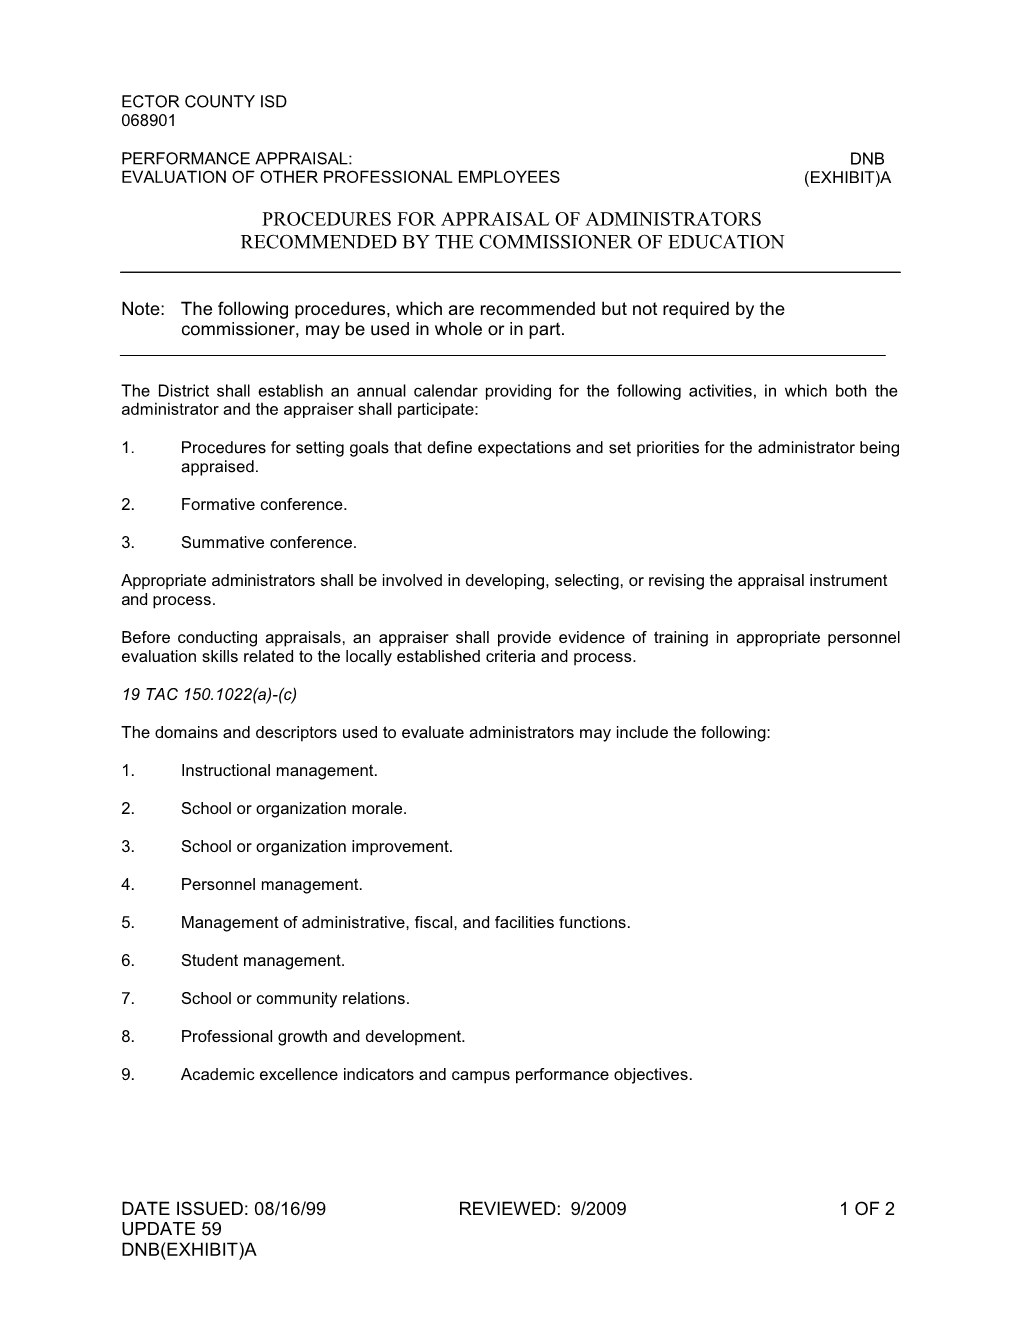 Procedures for Appraisal of Administrators Recommended by the Commissioner of Education